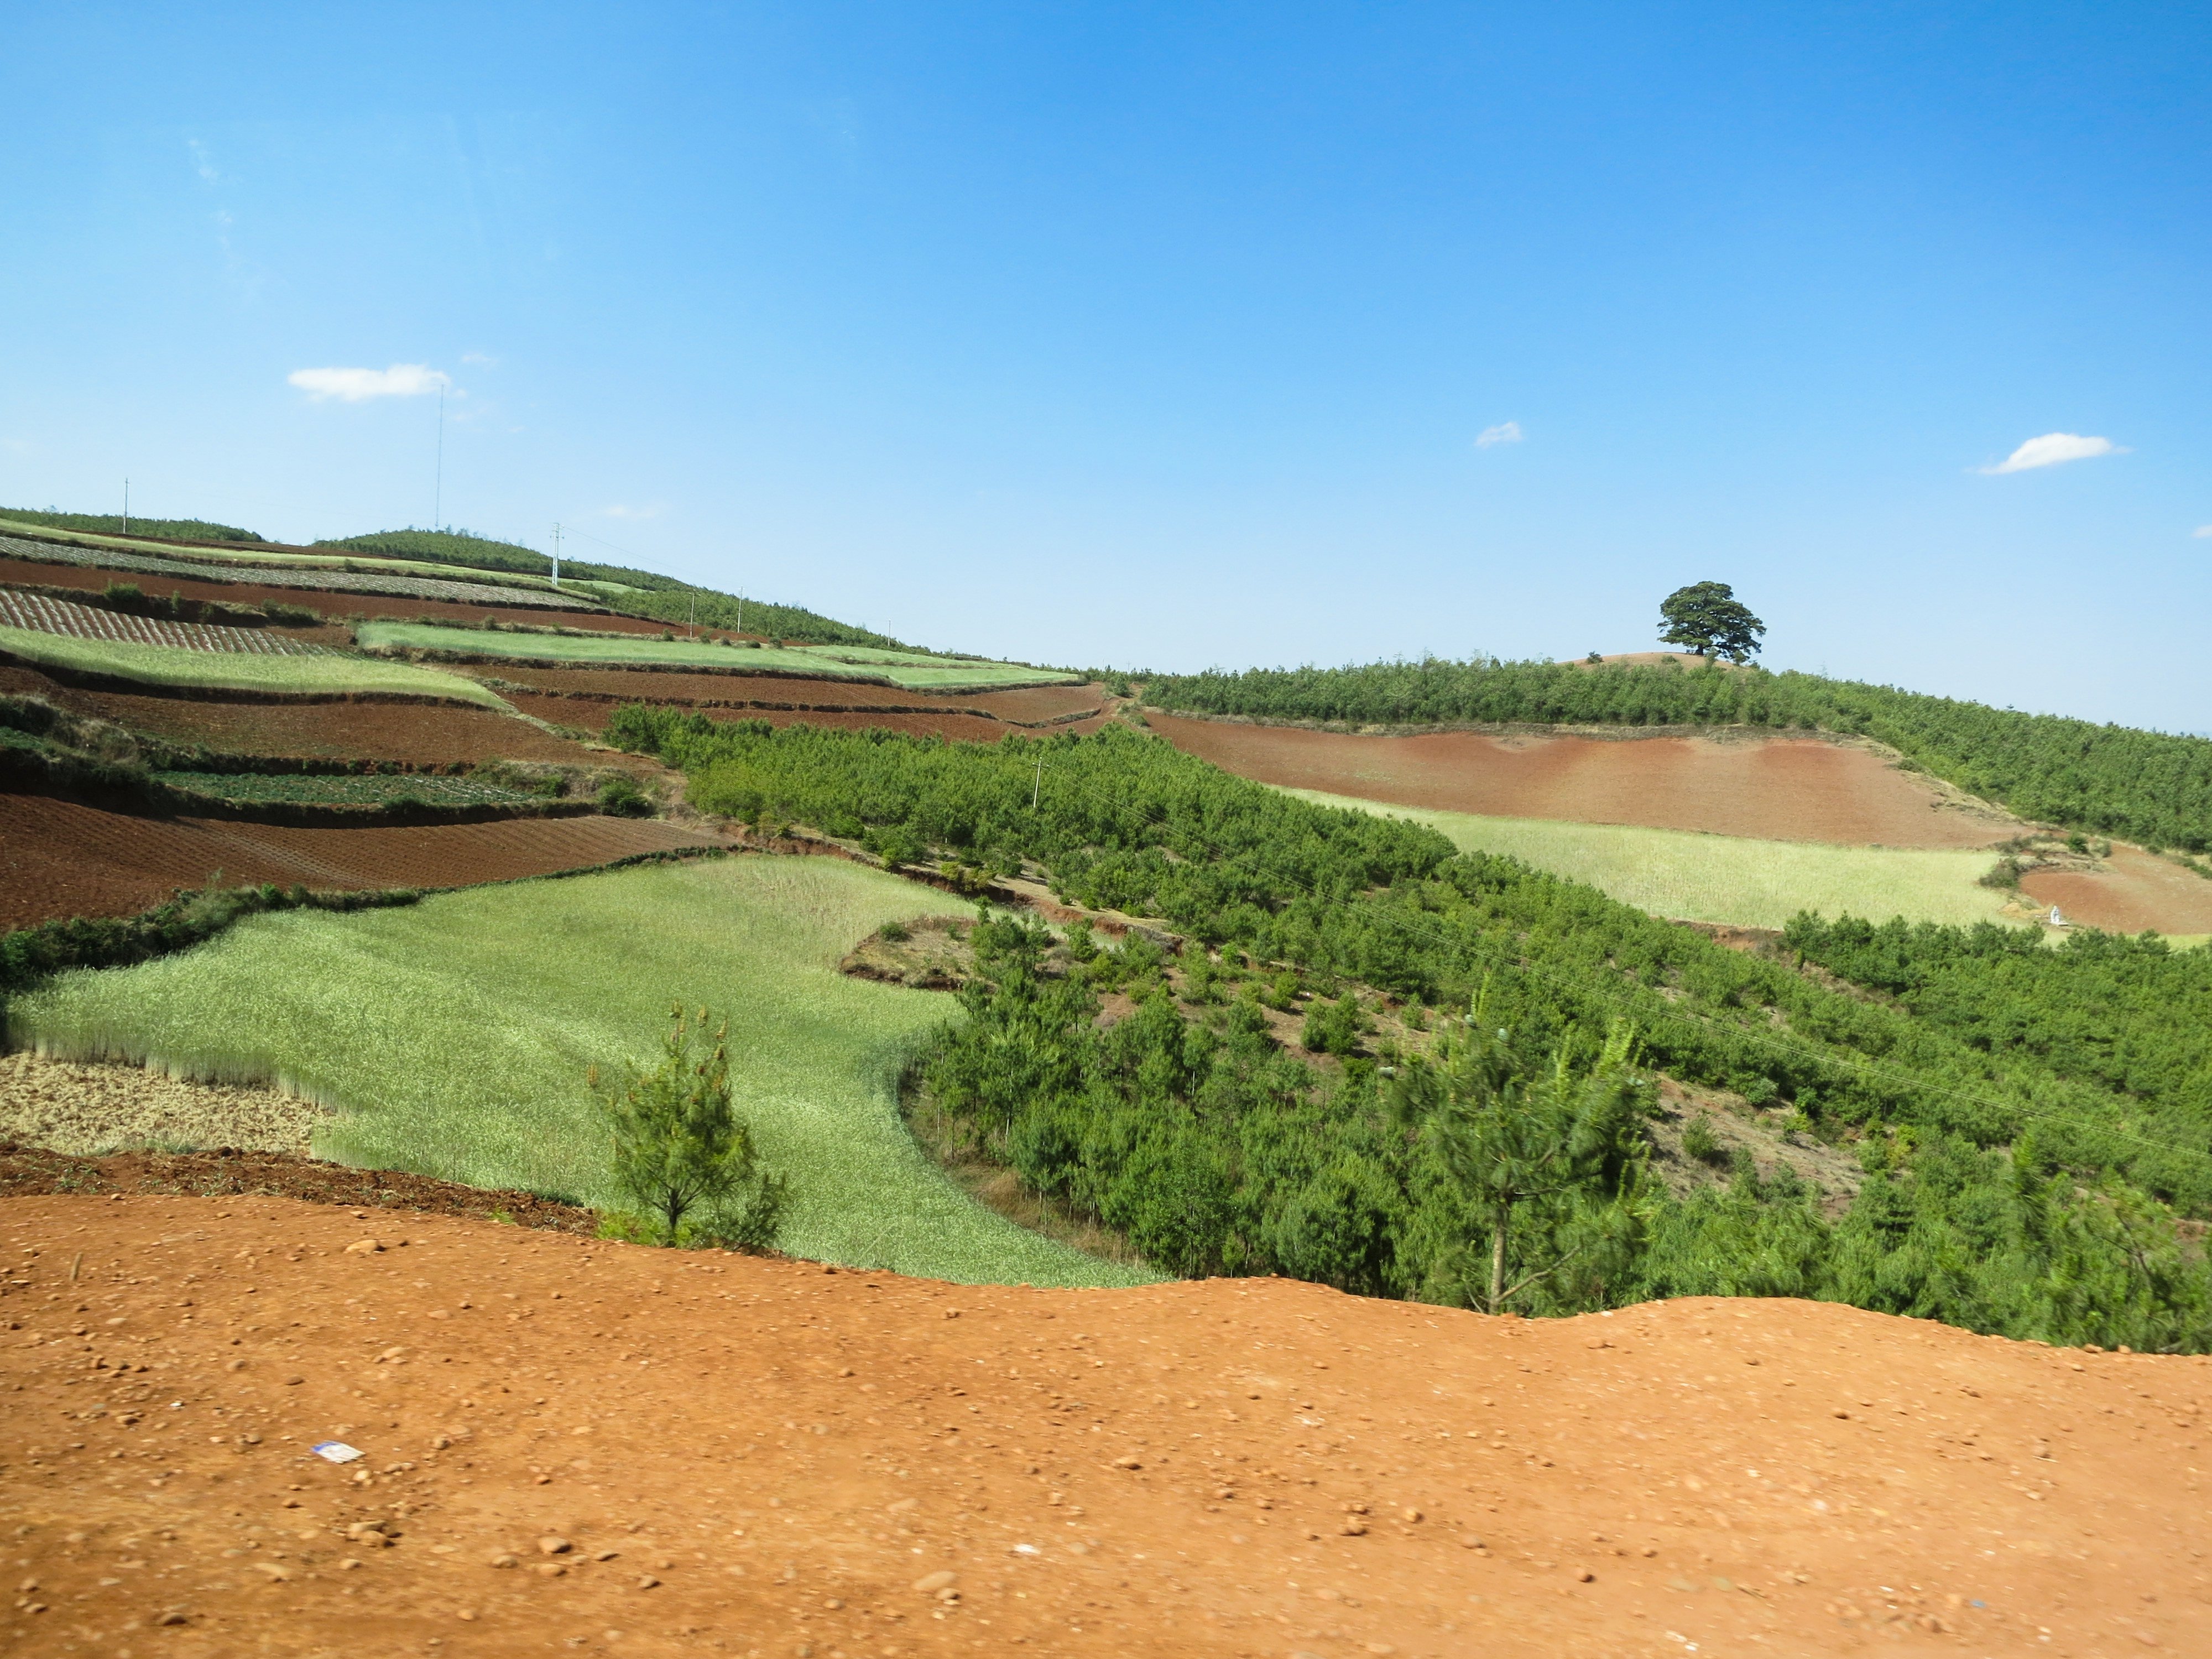 Example of reforestation, or afforestation, as a result of the Conversion of Cropland to Forest Program in southern China.